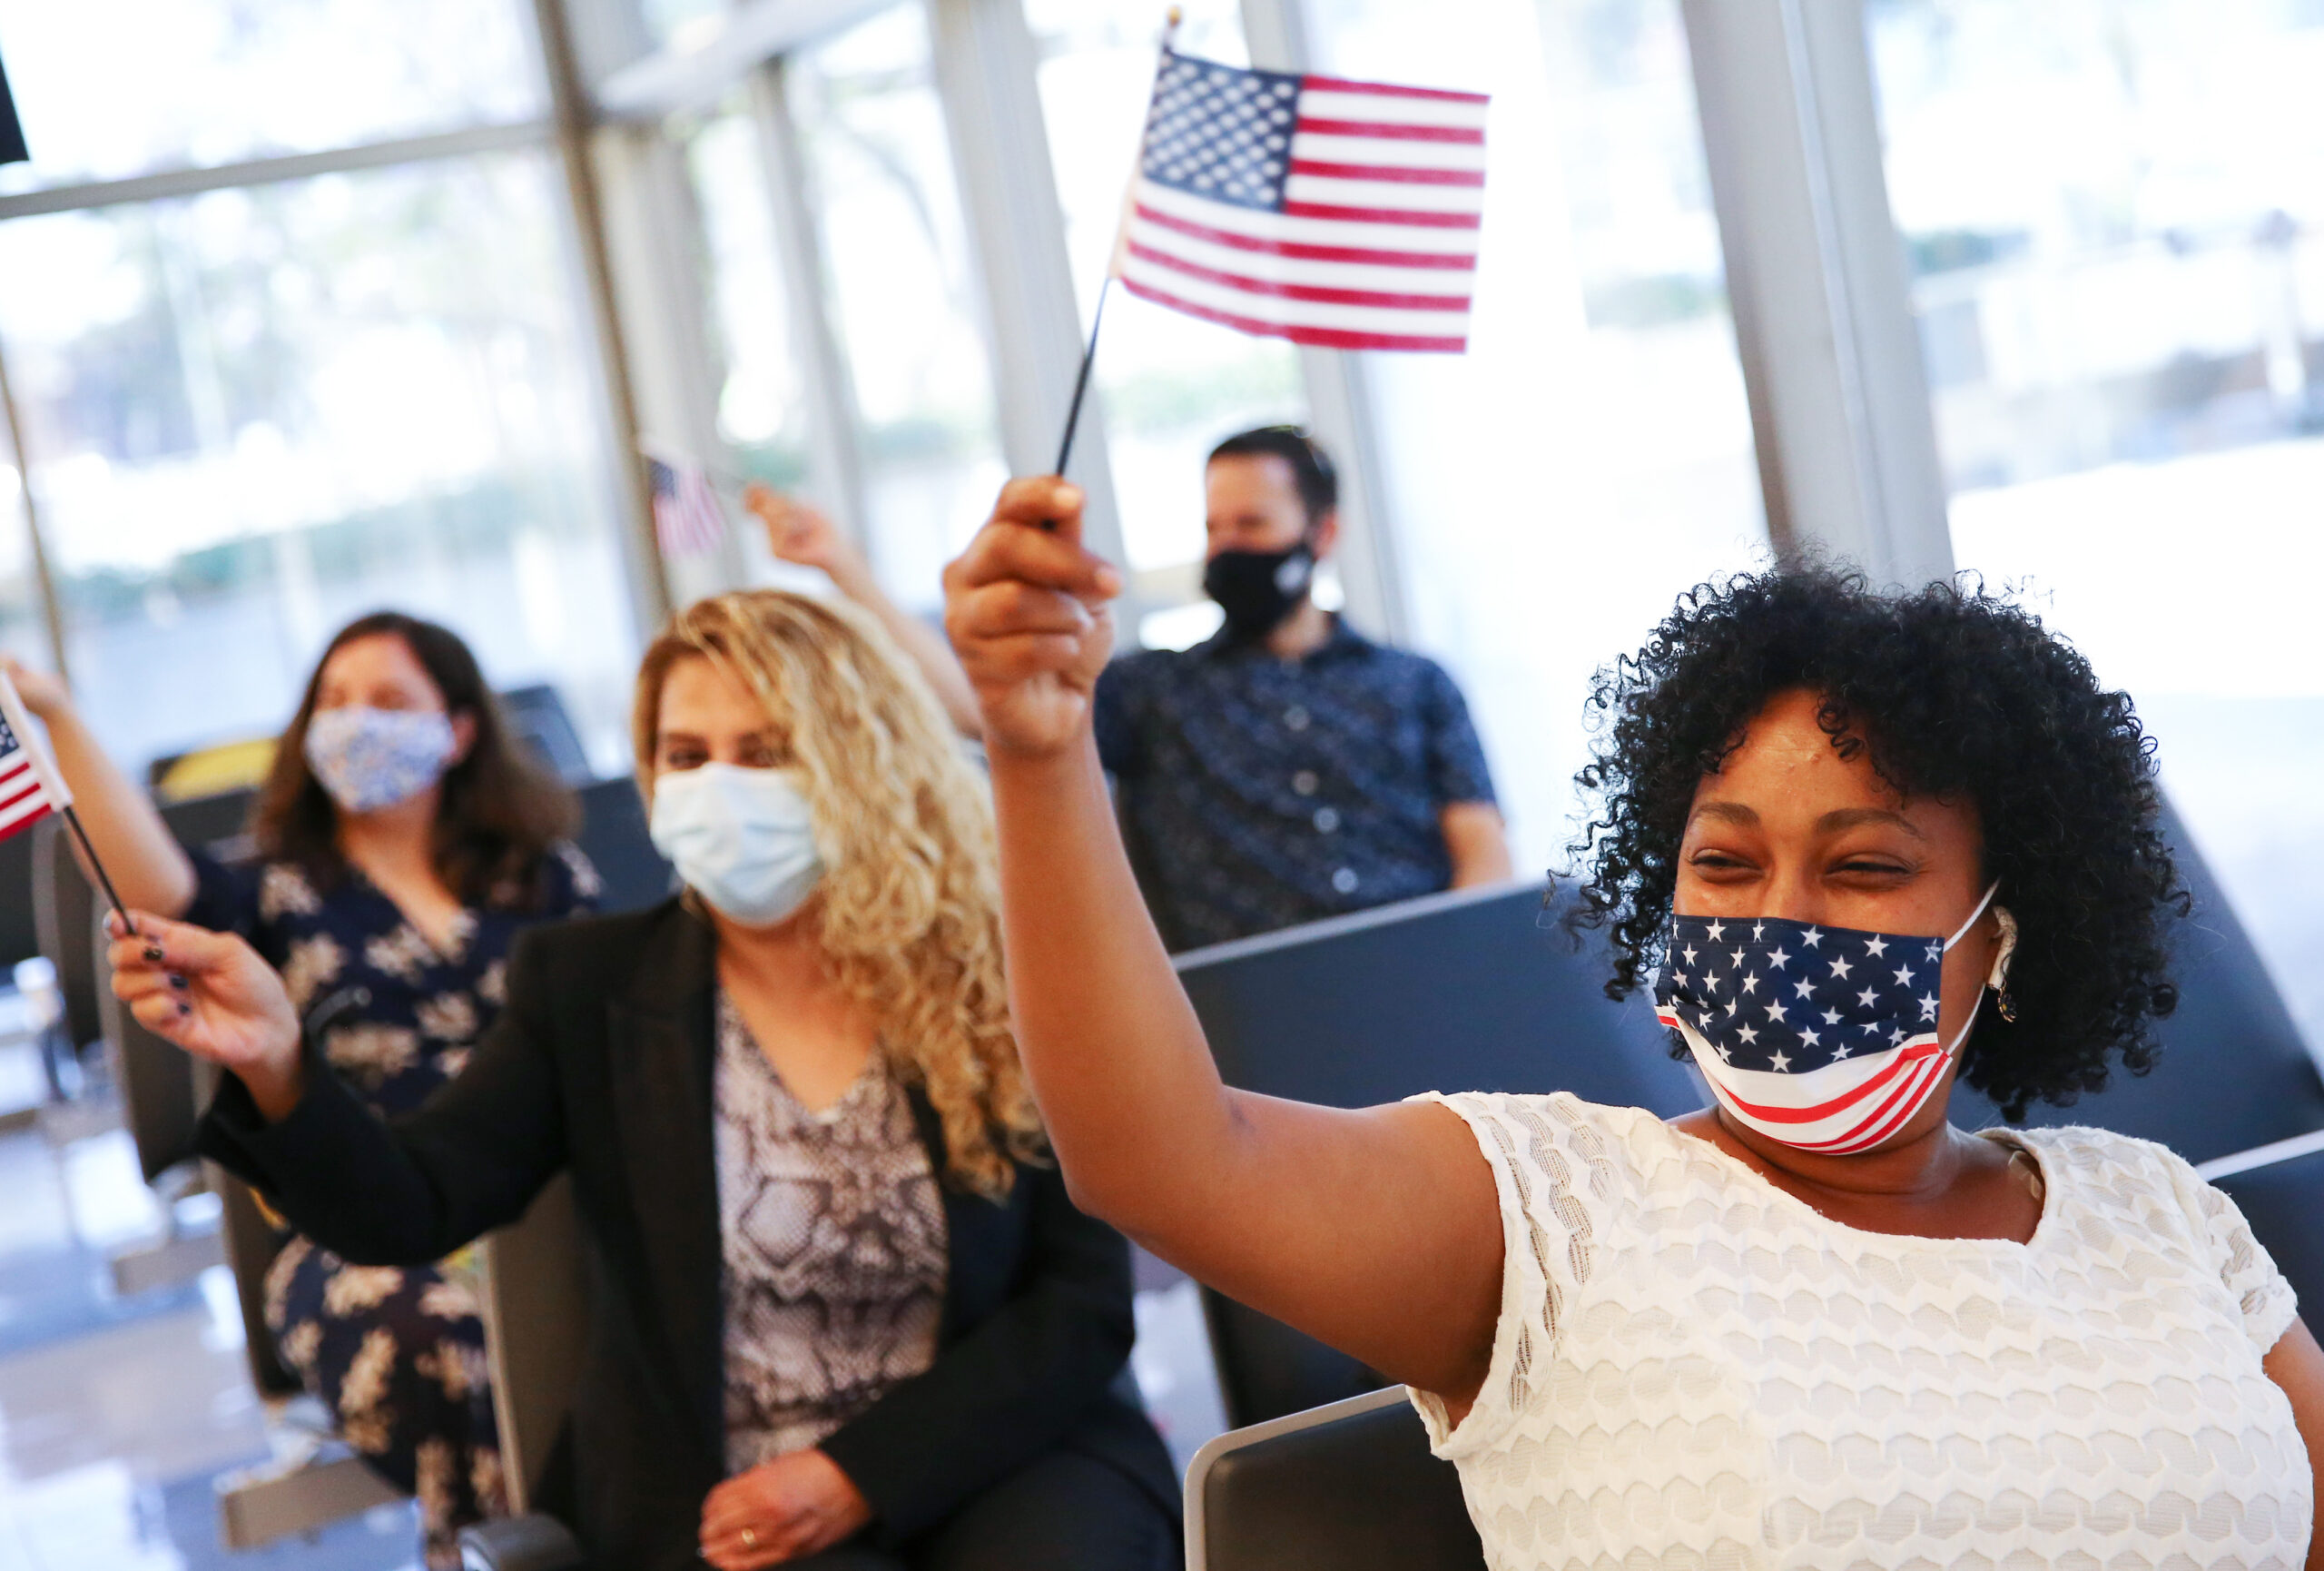 LOS ANGELES, CALIFORNIA - JUNE 17:  New U.S. citizens including Selamawit Berhane (R), originally from Ethiopia, wave American flags during a special World Refugee Day naturalization ceremony on June 17, 2021 in Los Angeles, California. 26 new U.S. citizens, most of whom are refugees, were sworn in at the U.S. Citizenship and Immigration Services (USCIS) ceremony. (Photo by Mario Tama/Getty Images)